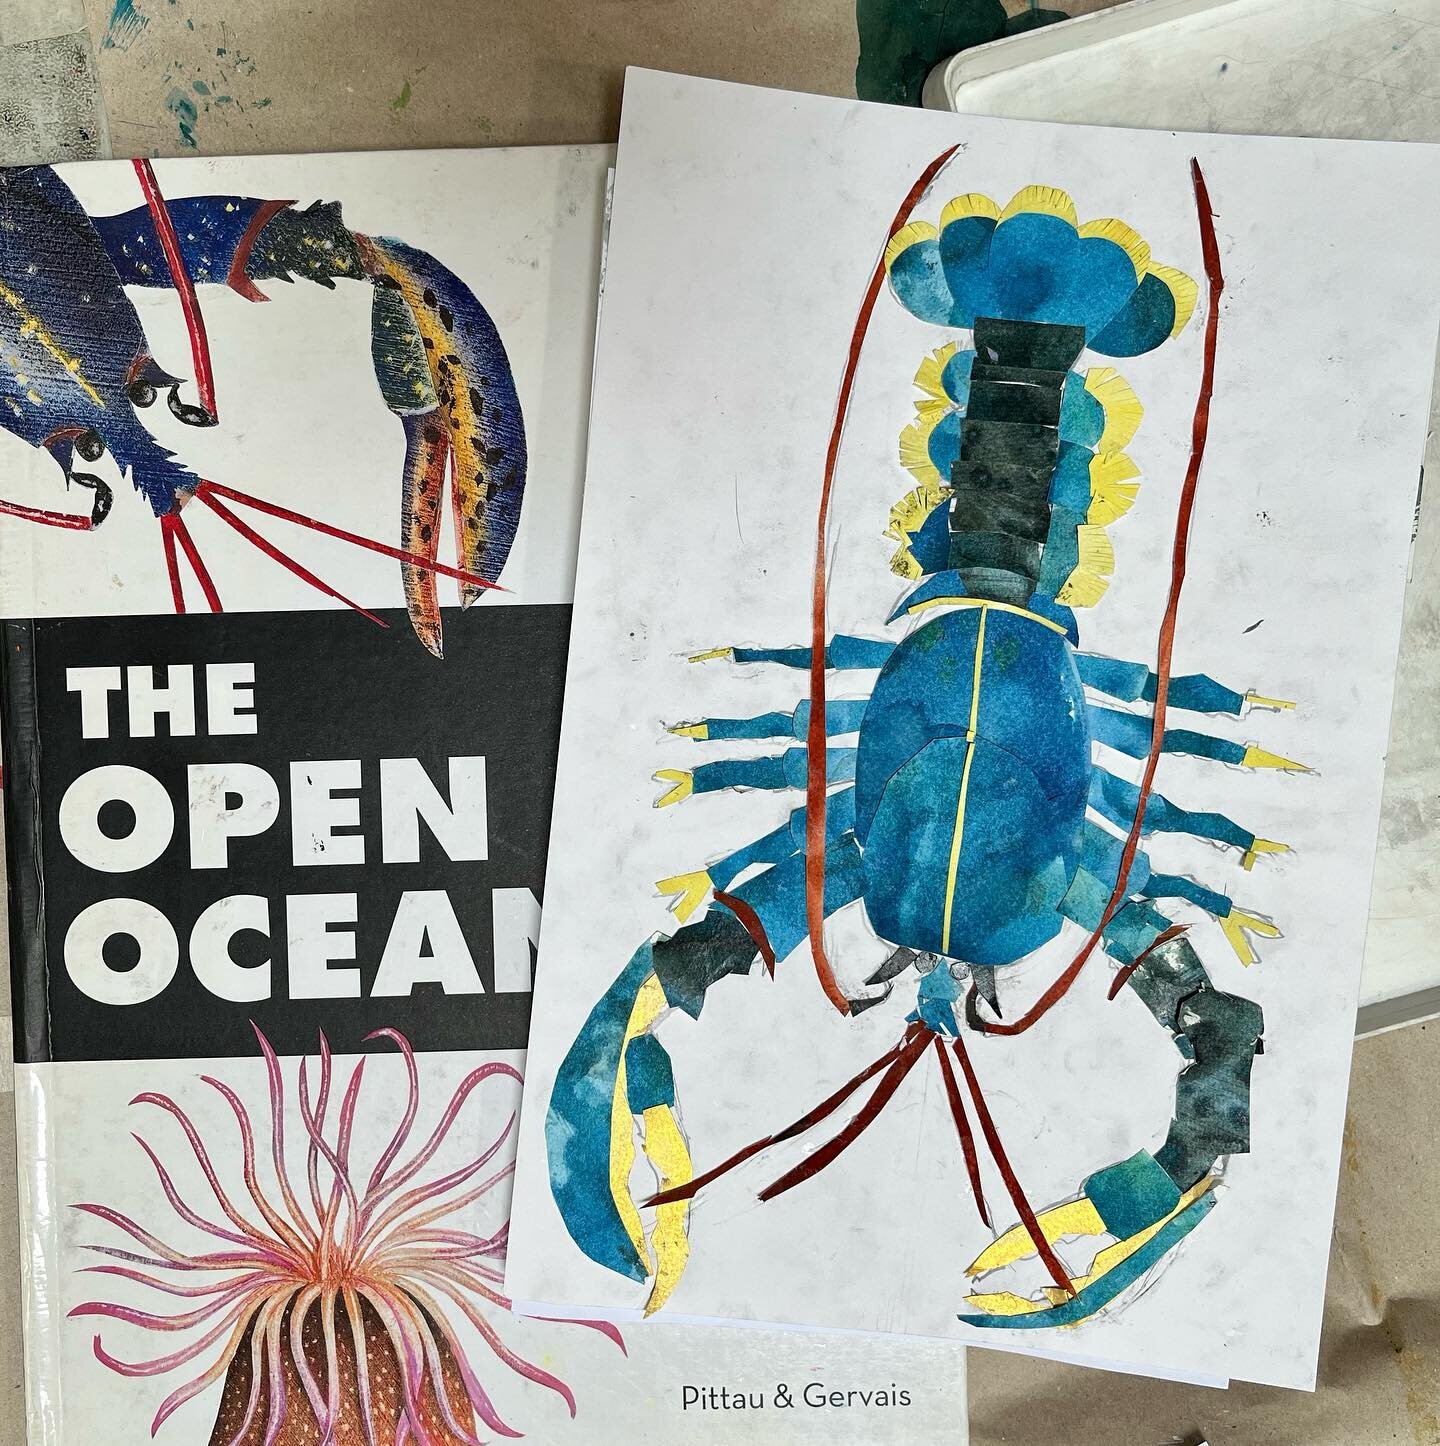 Our 9+ Technique classes began the holidays exploring sketching, mark making, inks and collage. Taking inspiration from our art library of wonderful books. 

The Open Ocean is an absolutely beautifully produced book by Francesco Pittau and @bernadett